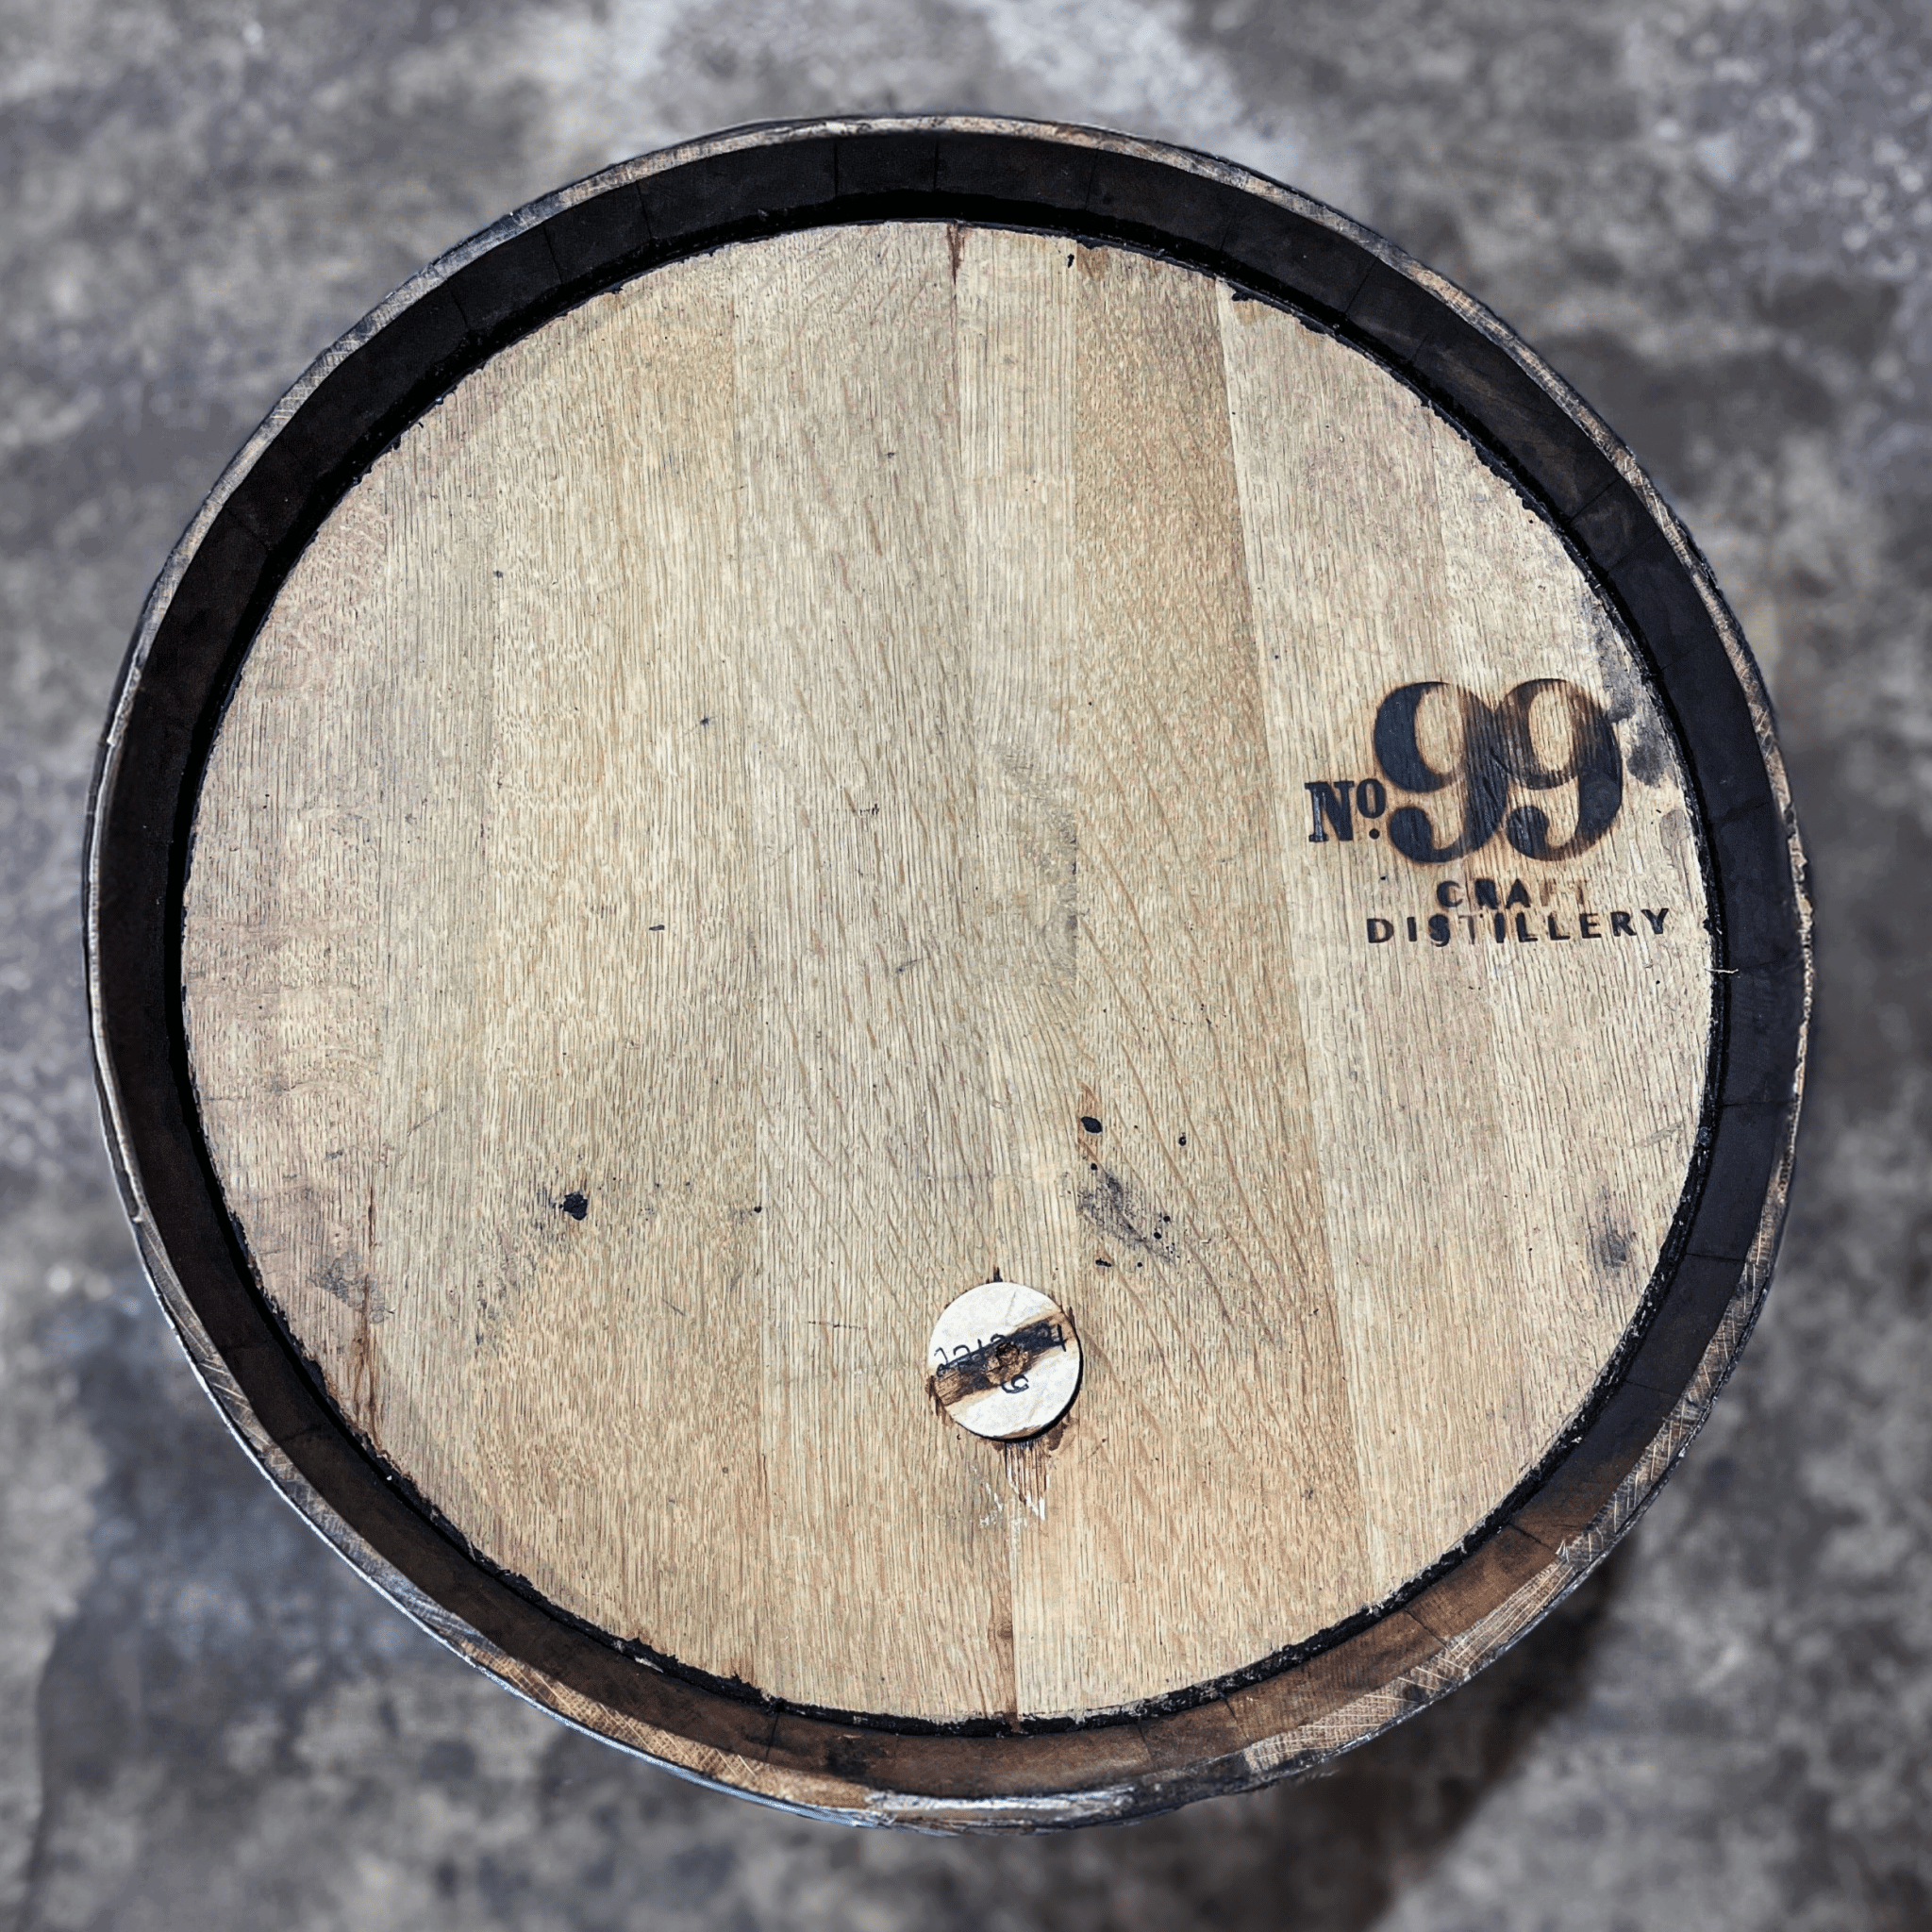 228L Ex-Red Wine, Wayne Gretzky Whisky Barrel (Shaved and Charred) - The County Cooperage